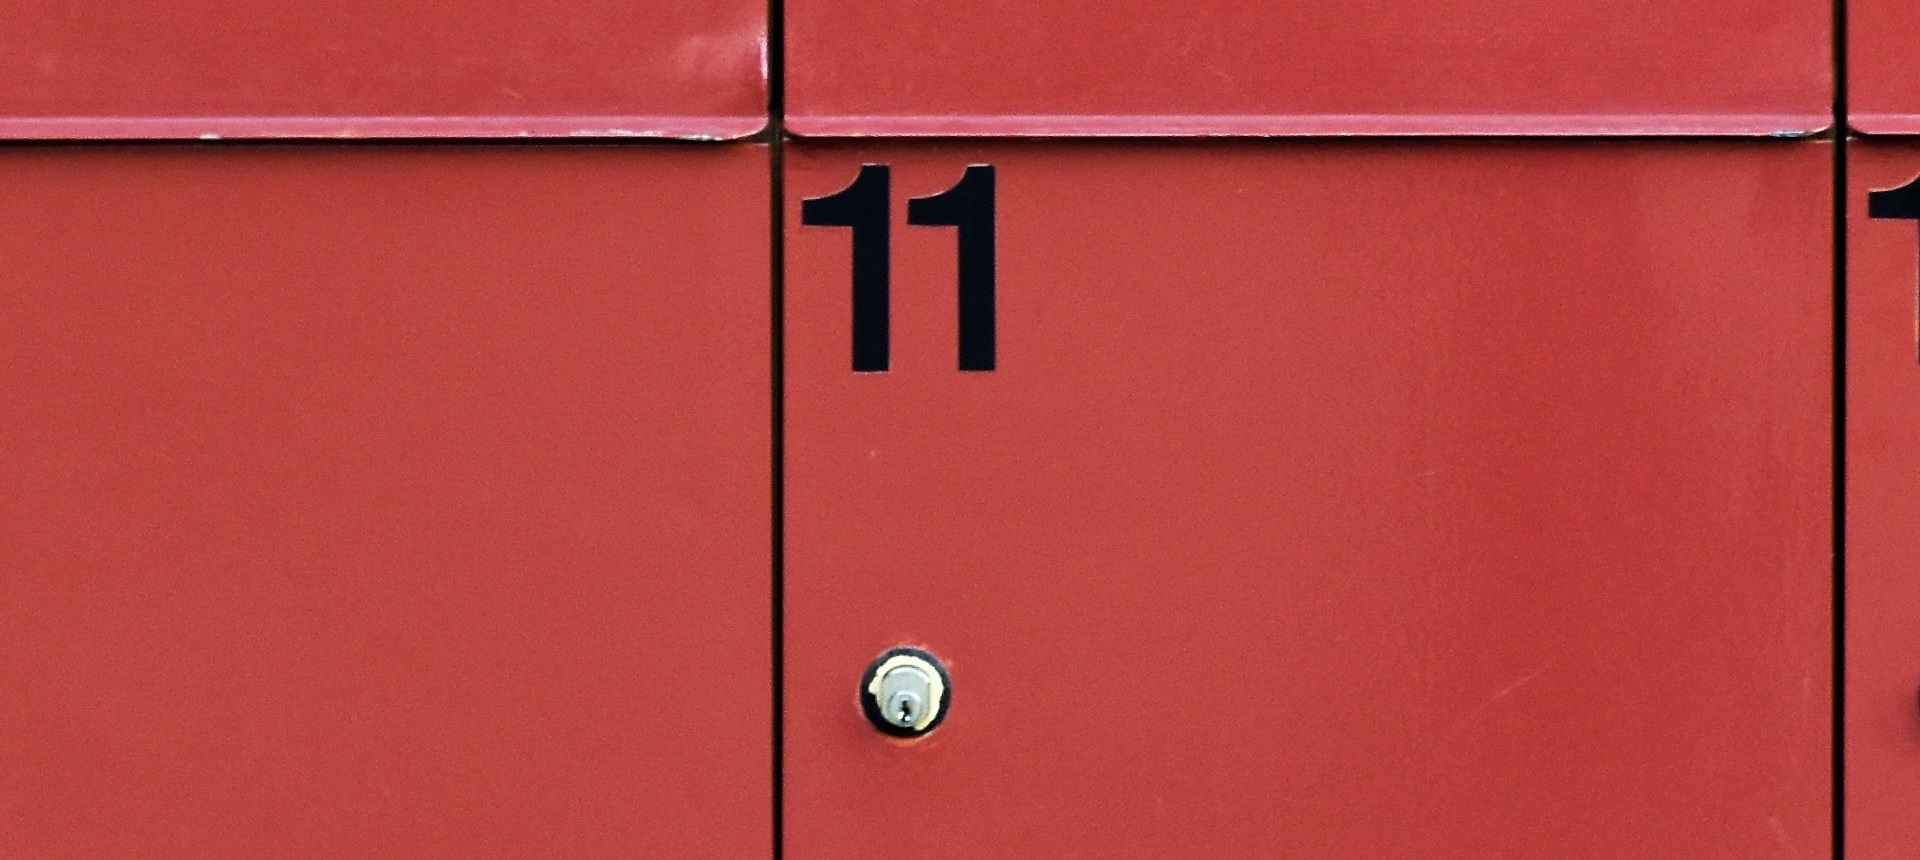 A storage locker with the number 11. Photo by Waldemar on Unsplash